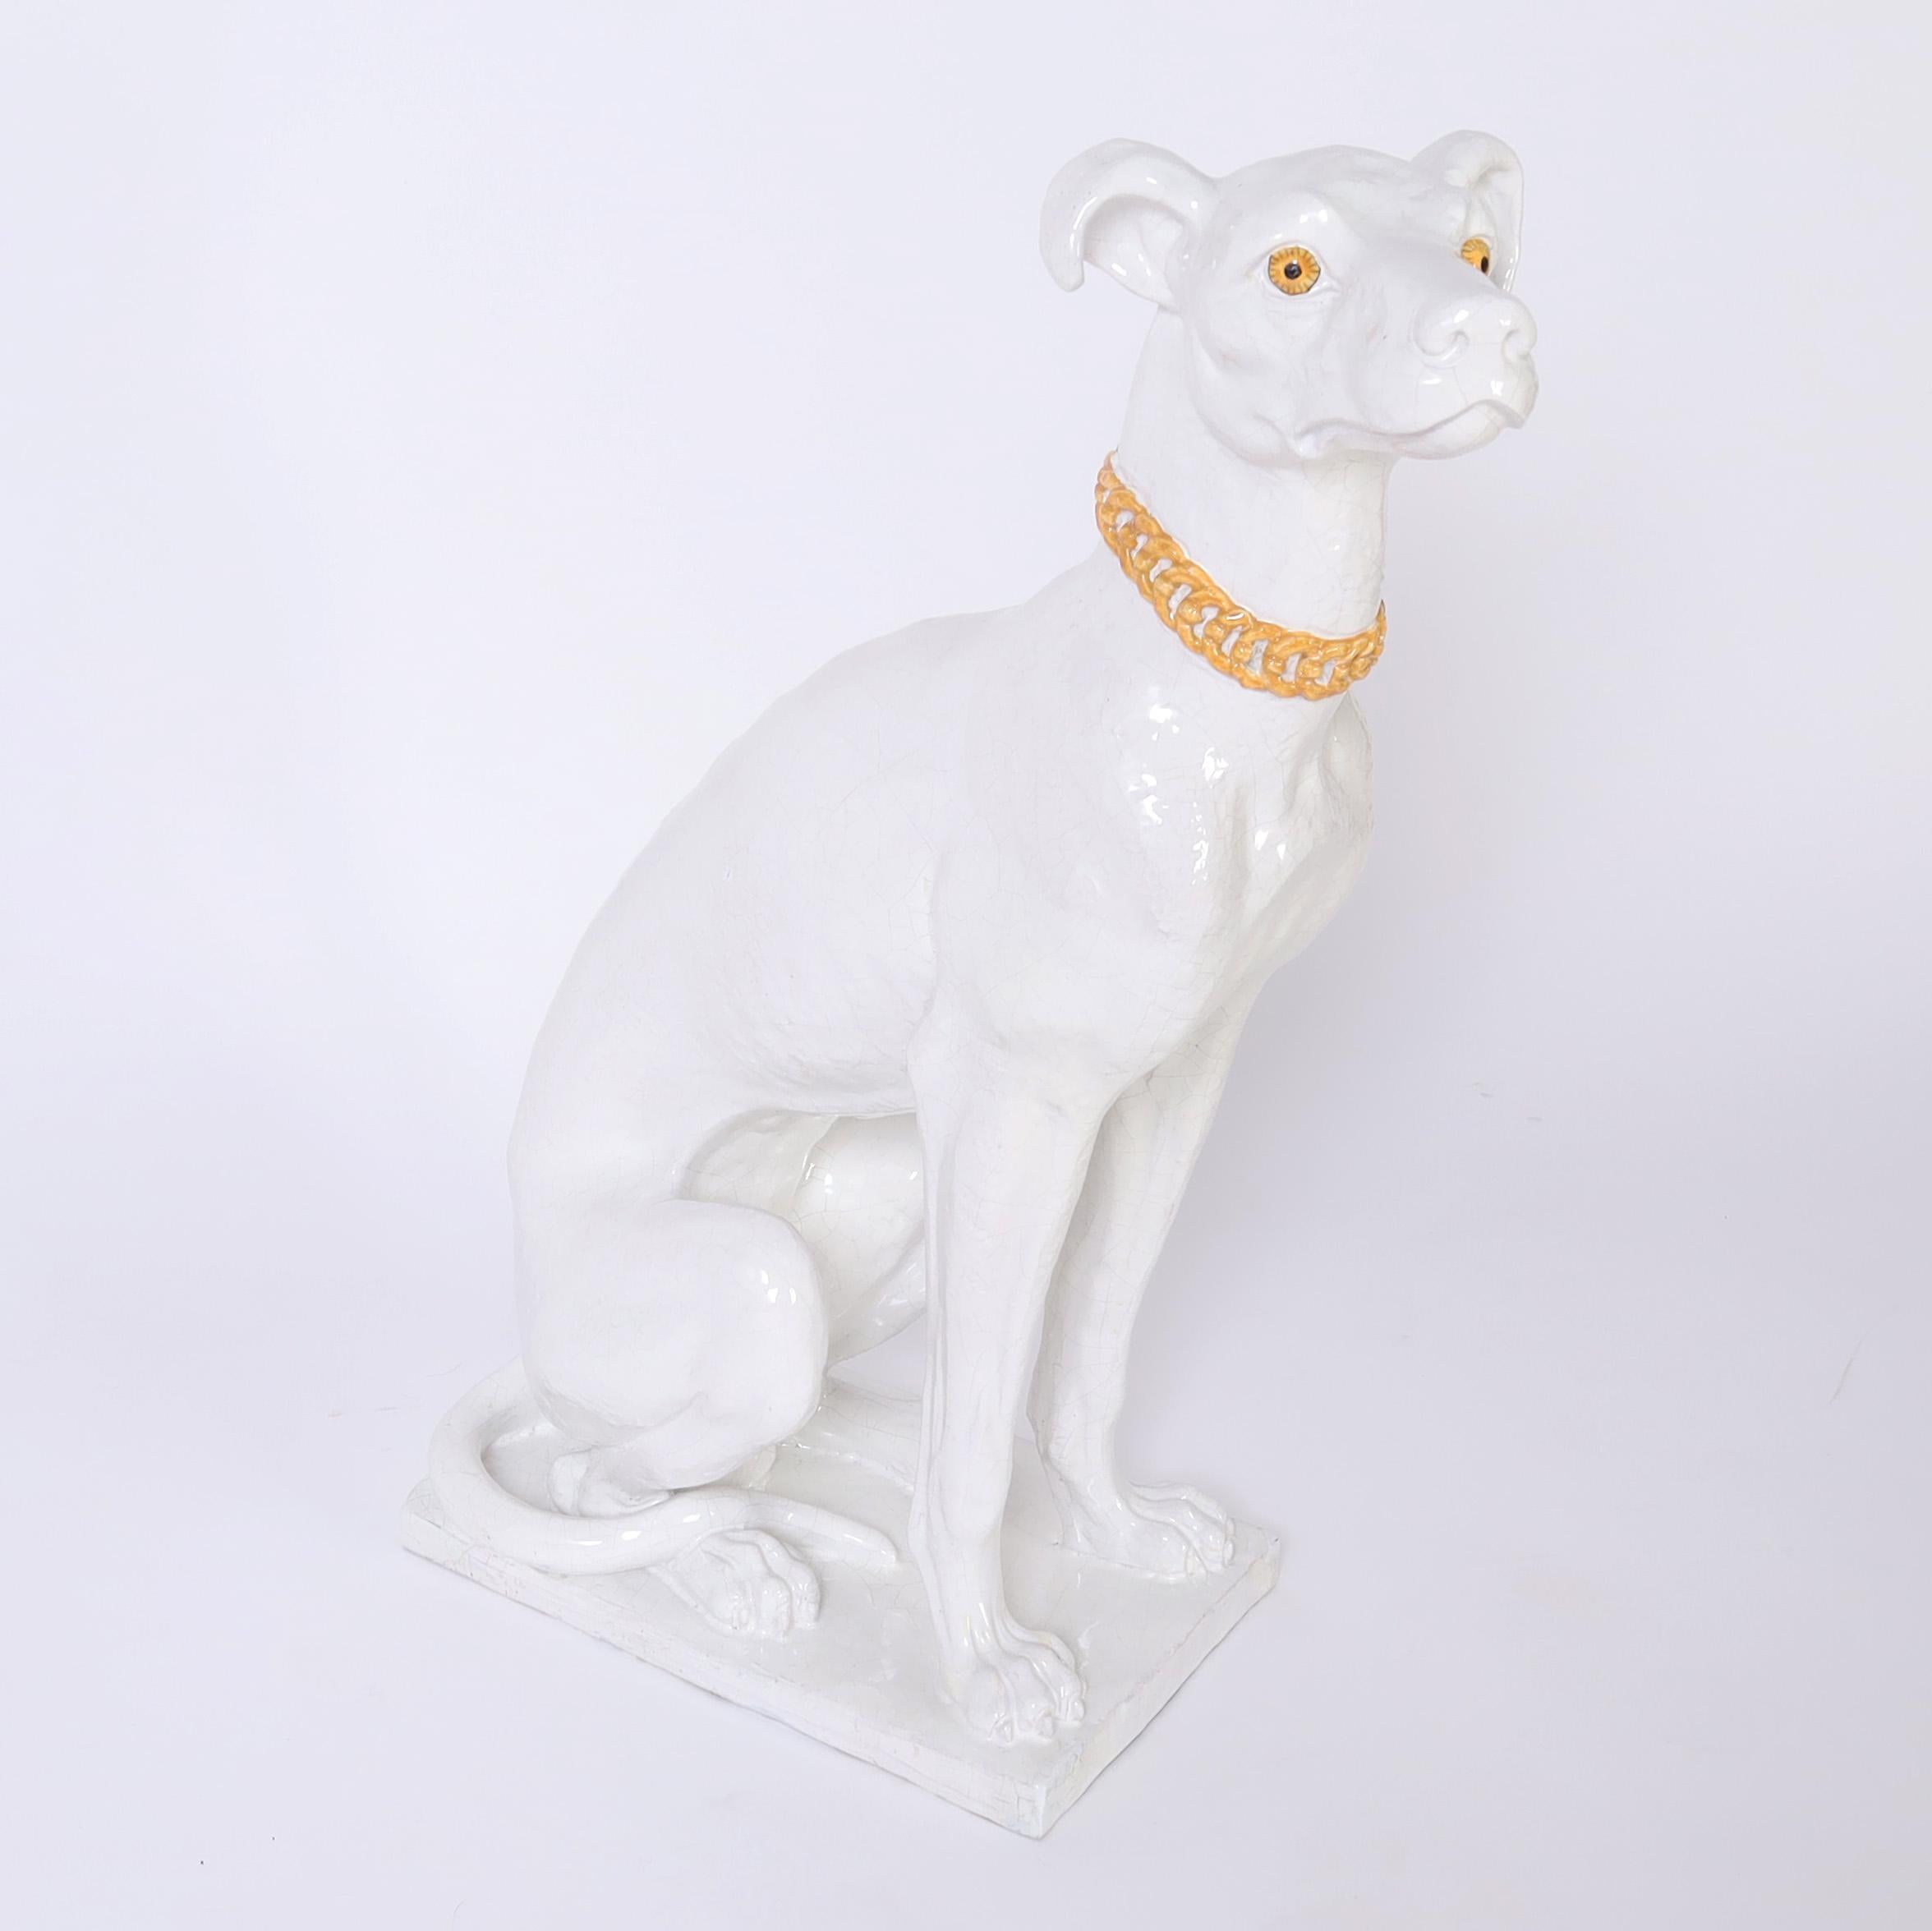 Striking Mid Century Italian life size dog sculpture crafted in terracotta with a white glaze and mesmerizing gold eyes. Marked Italy on the bottom.